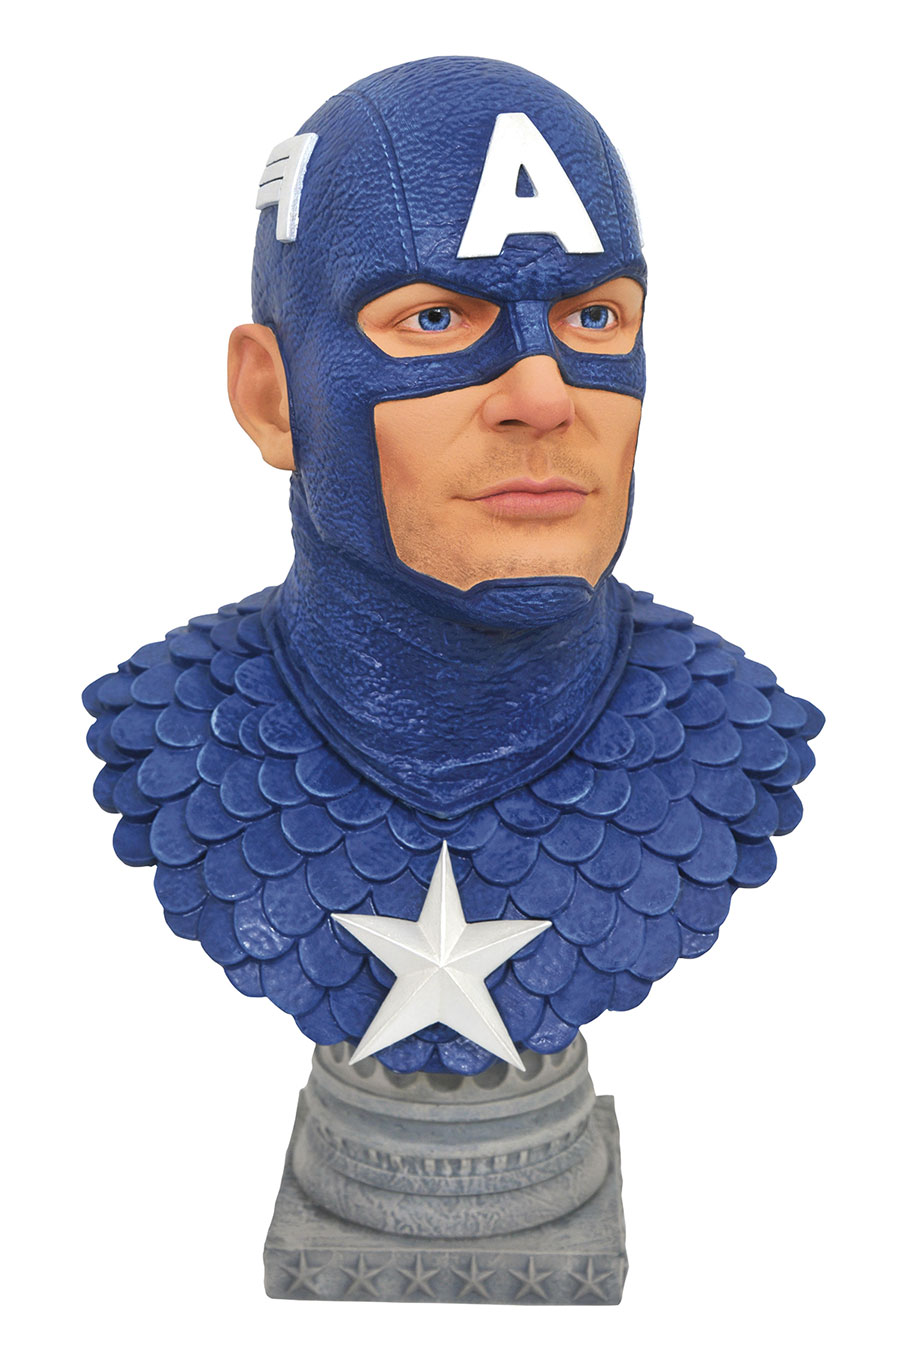 Legends In 3D Marvel Comic Captain America 1/2 Scale Bust